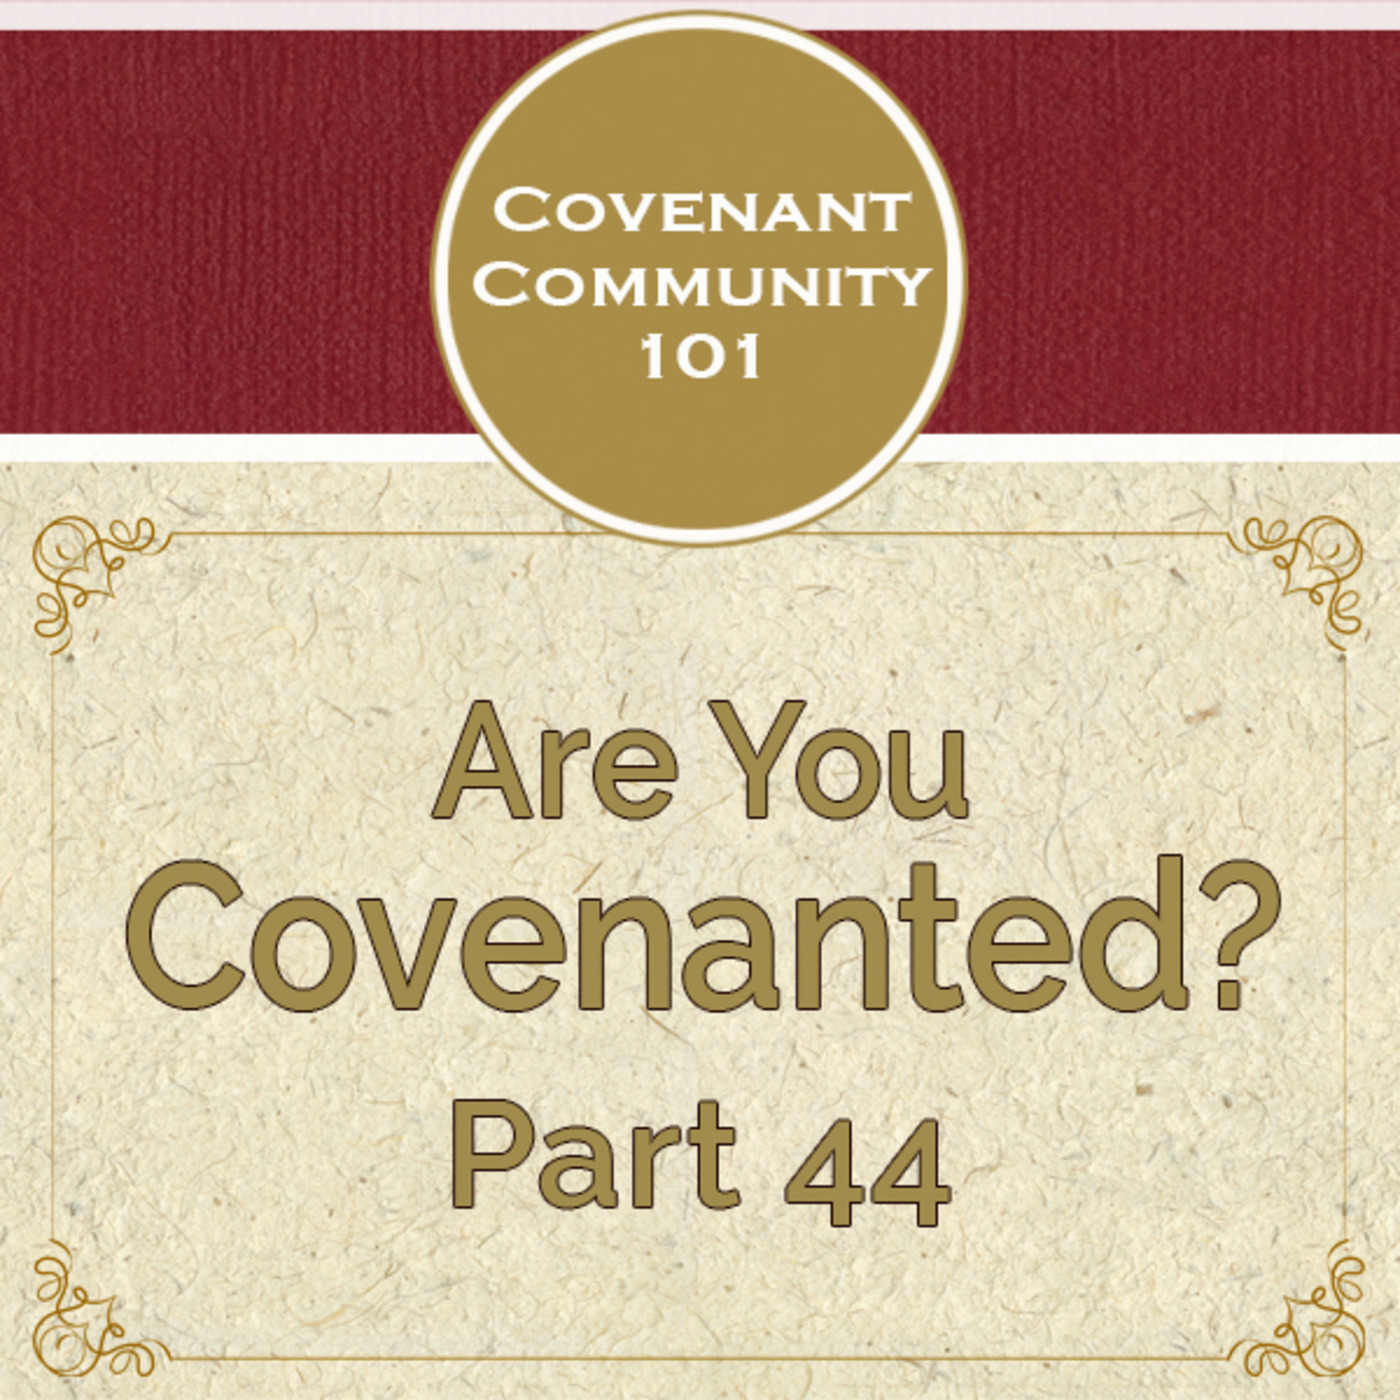 Covenant Community 101: Are You Covenanted? Part 44